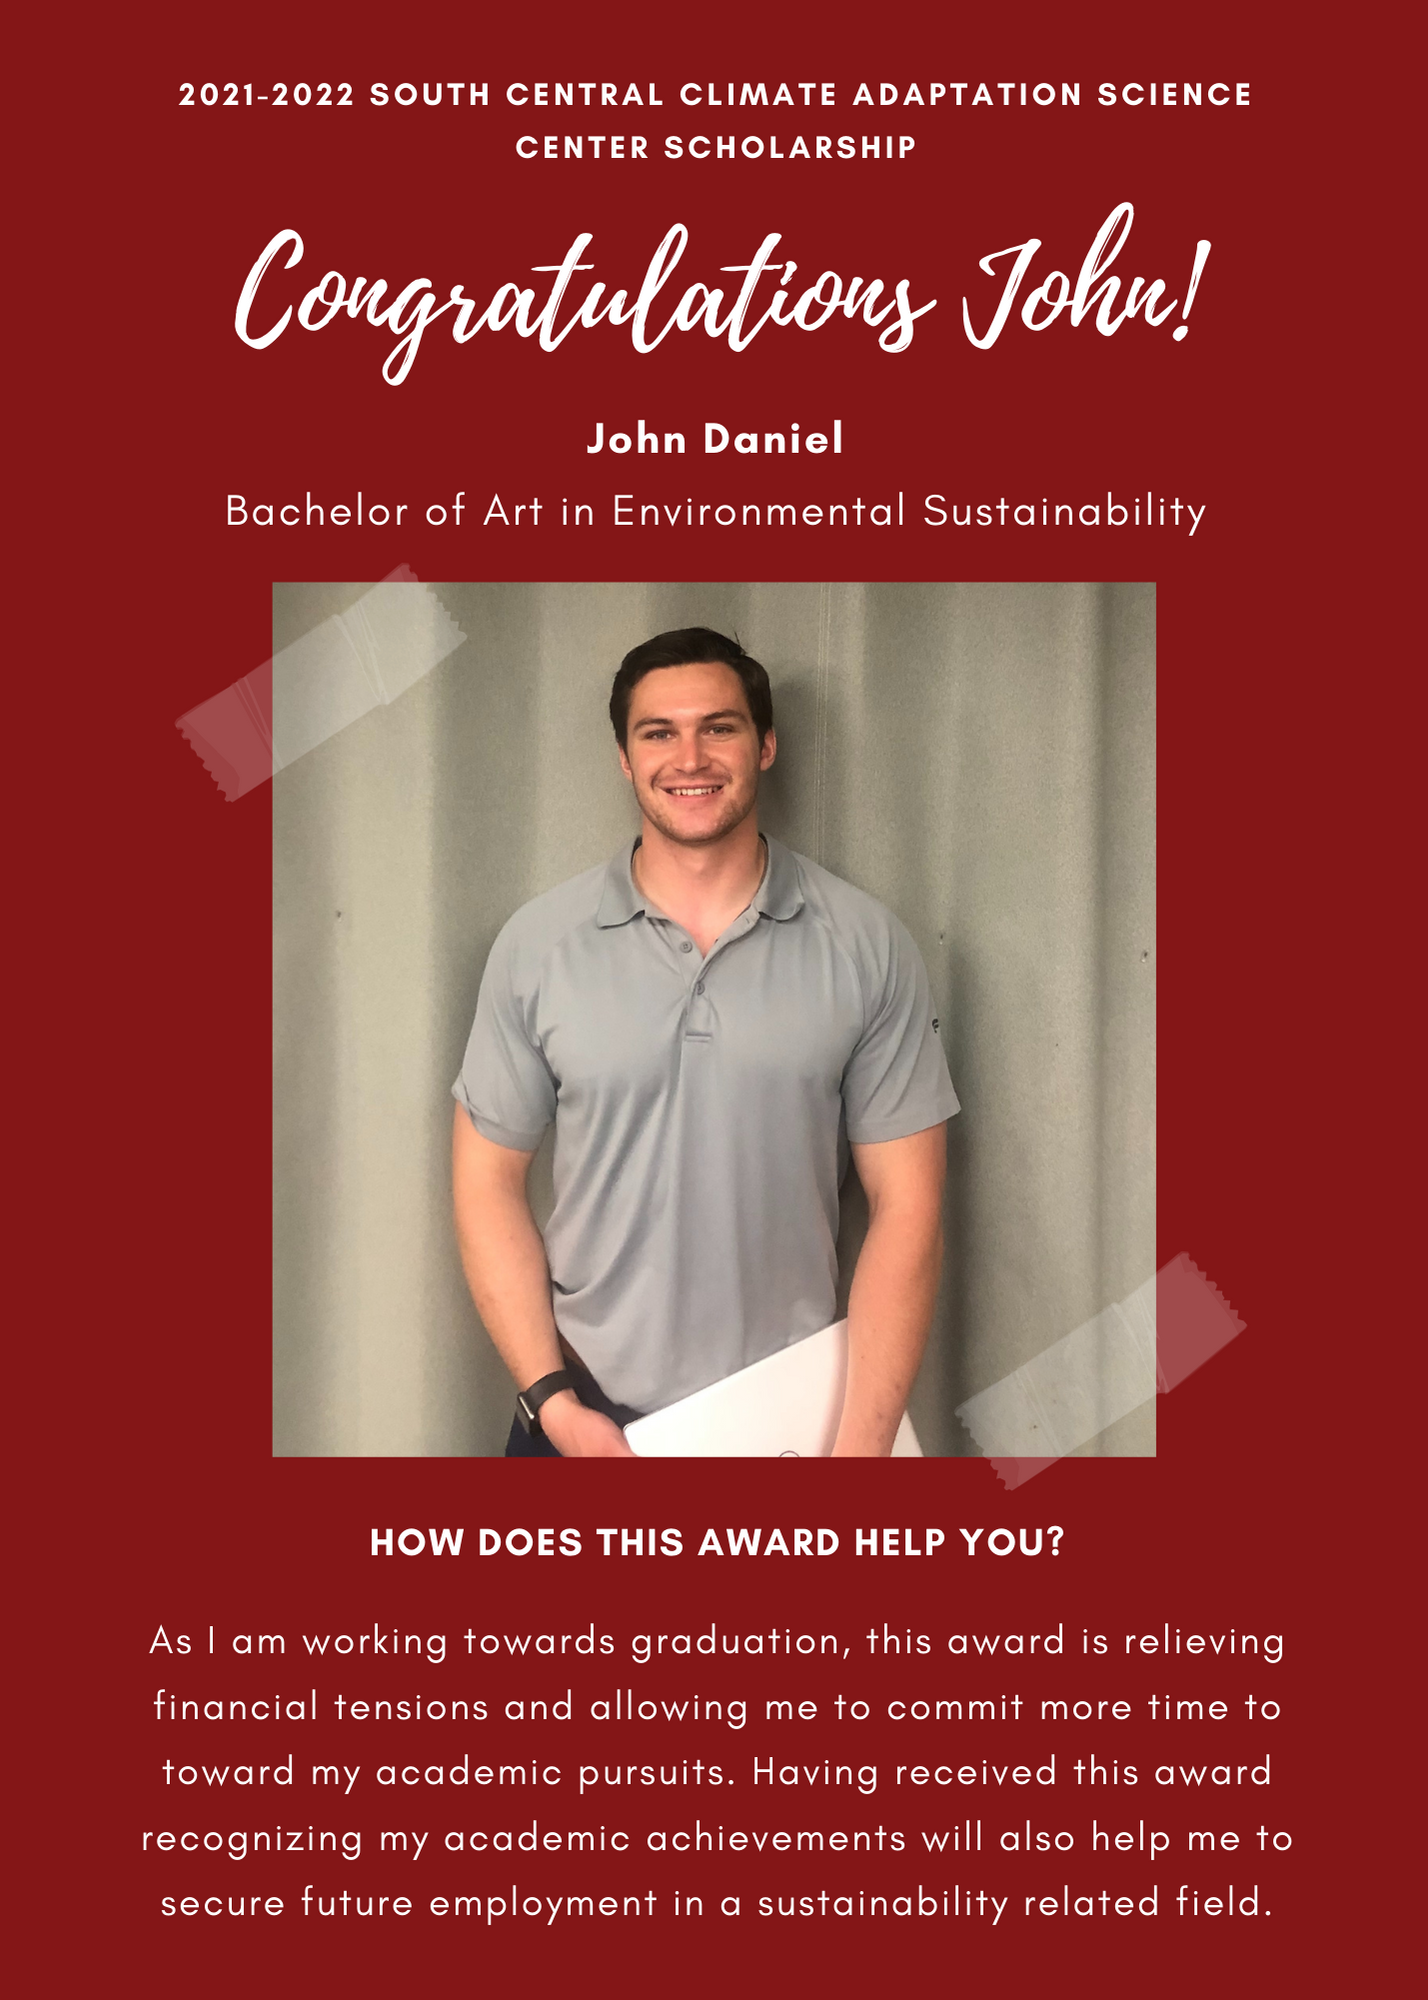 2021 -2022 A&GS South Central Climate Adaptation Science Center Scholarship. Congratulations John! John Daniels Bachelor of art in Environmental Sustainability. How does this award help you? As i am working towards graduation, this award is relieving financial tenshion and allowing me to commit more time toward my acadmeic pursuits. Having received this award recognizing my academic acheivements will also help me to secure future employment in a sustainabiluty related field.